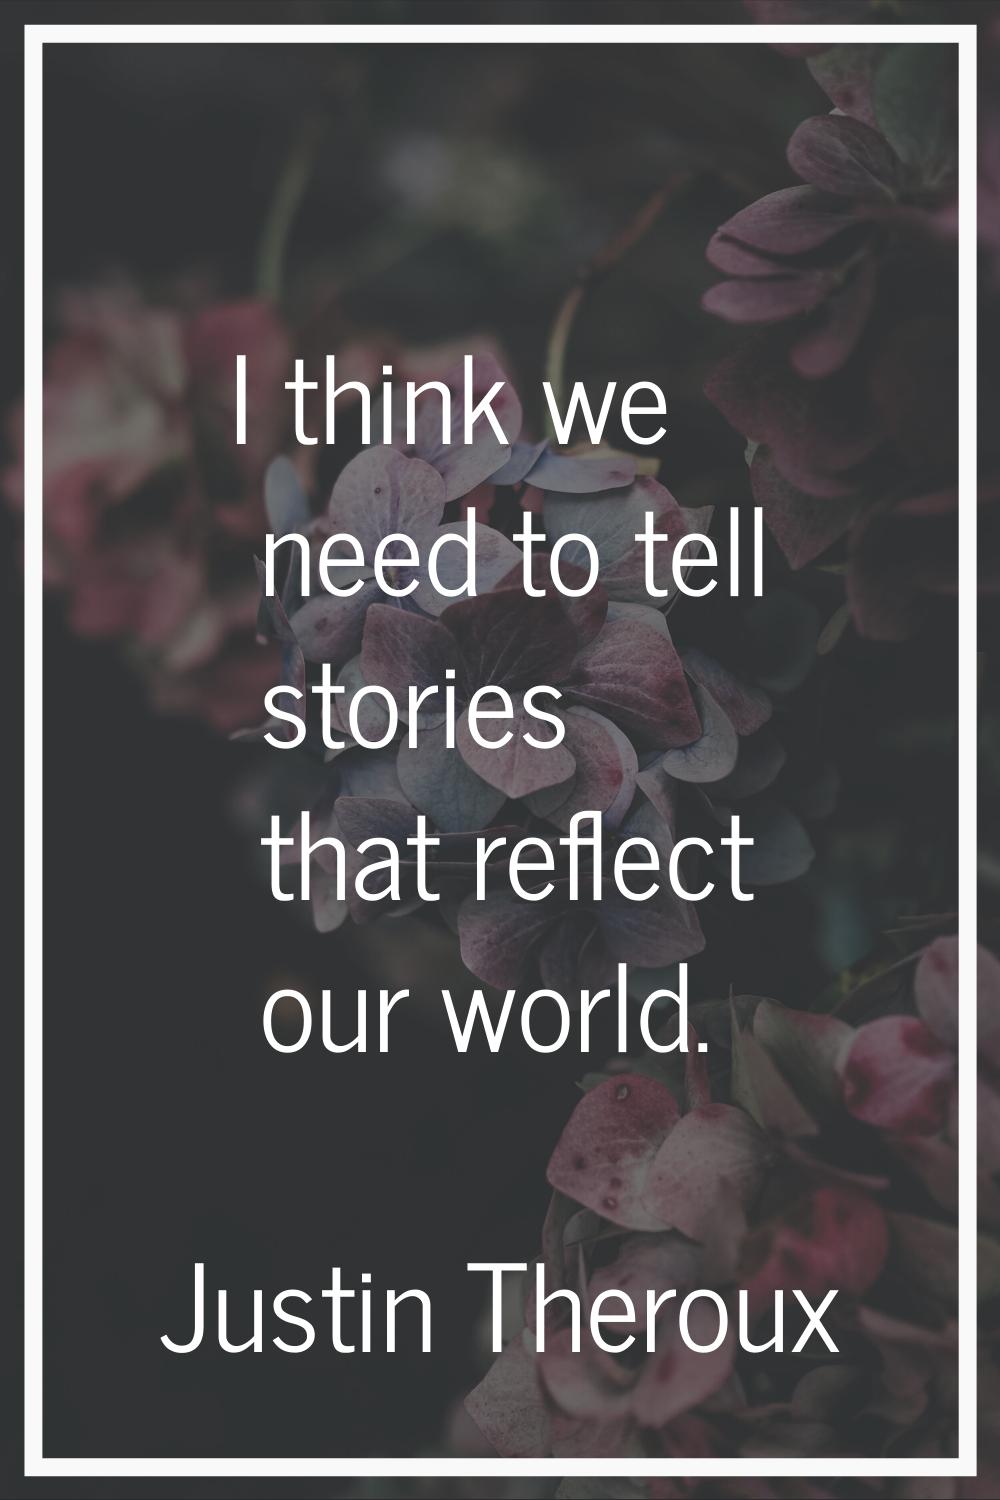 I think we need to tell stories that reflect our world.